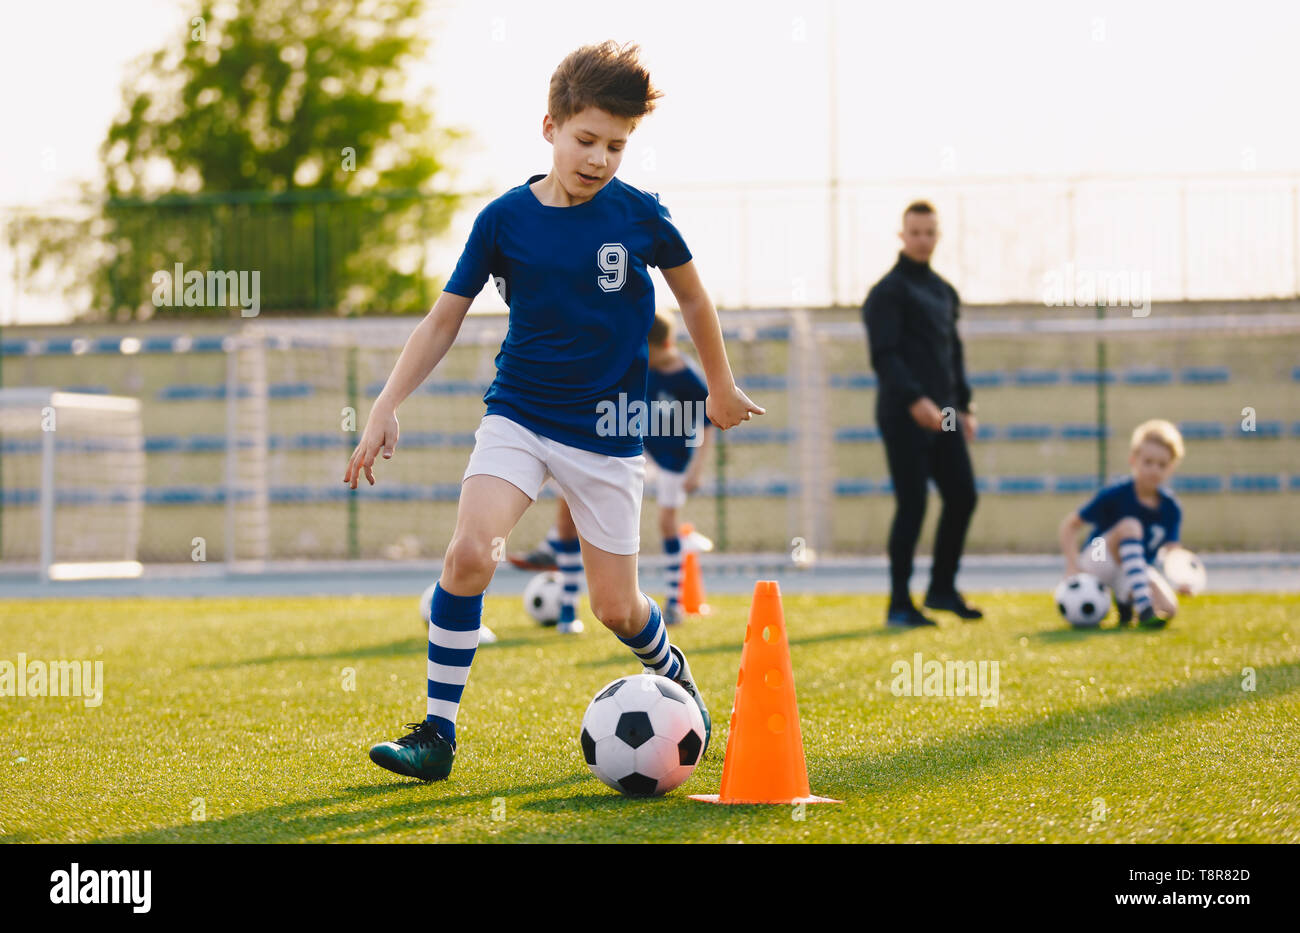 Boys training football dribbling in a field. Kids Running the Ball. Players develop soccer dribbling skills. Children training with balls and cones. S Stock Photo